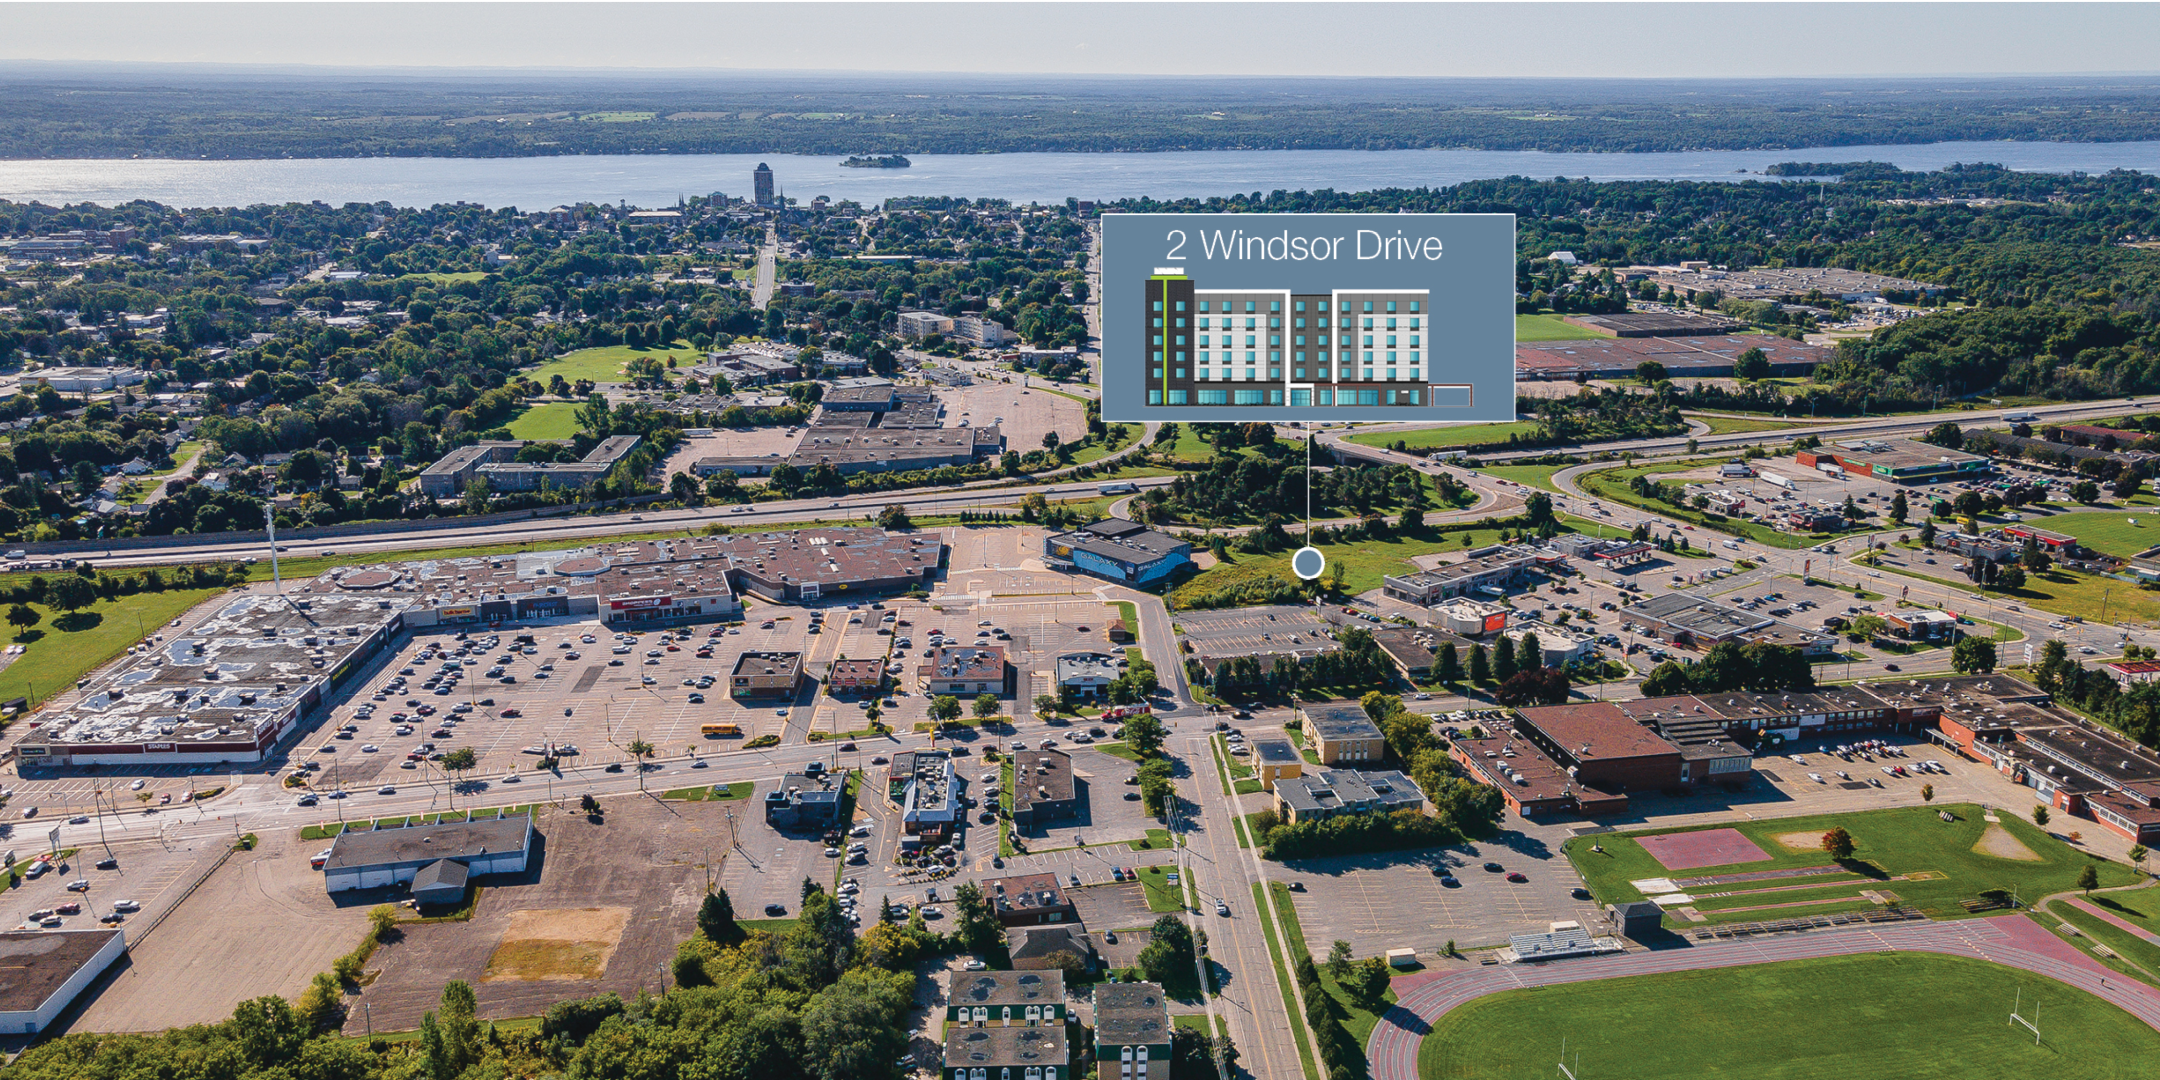 Aerial image of 2 Windsor Drive 